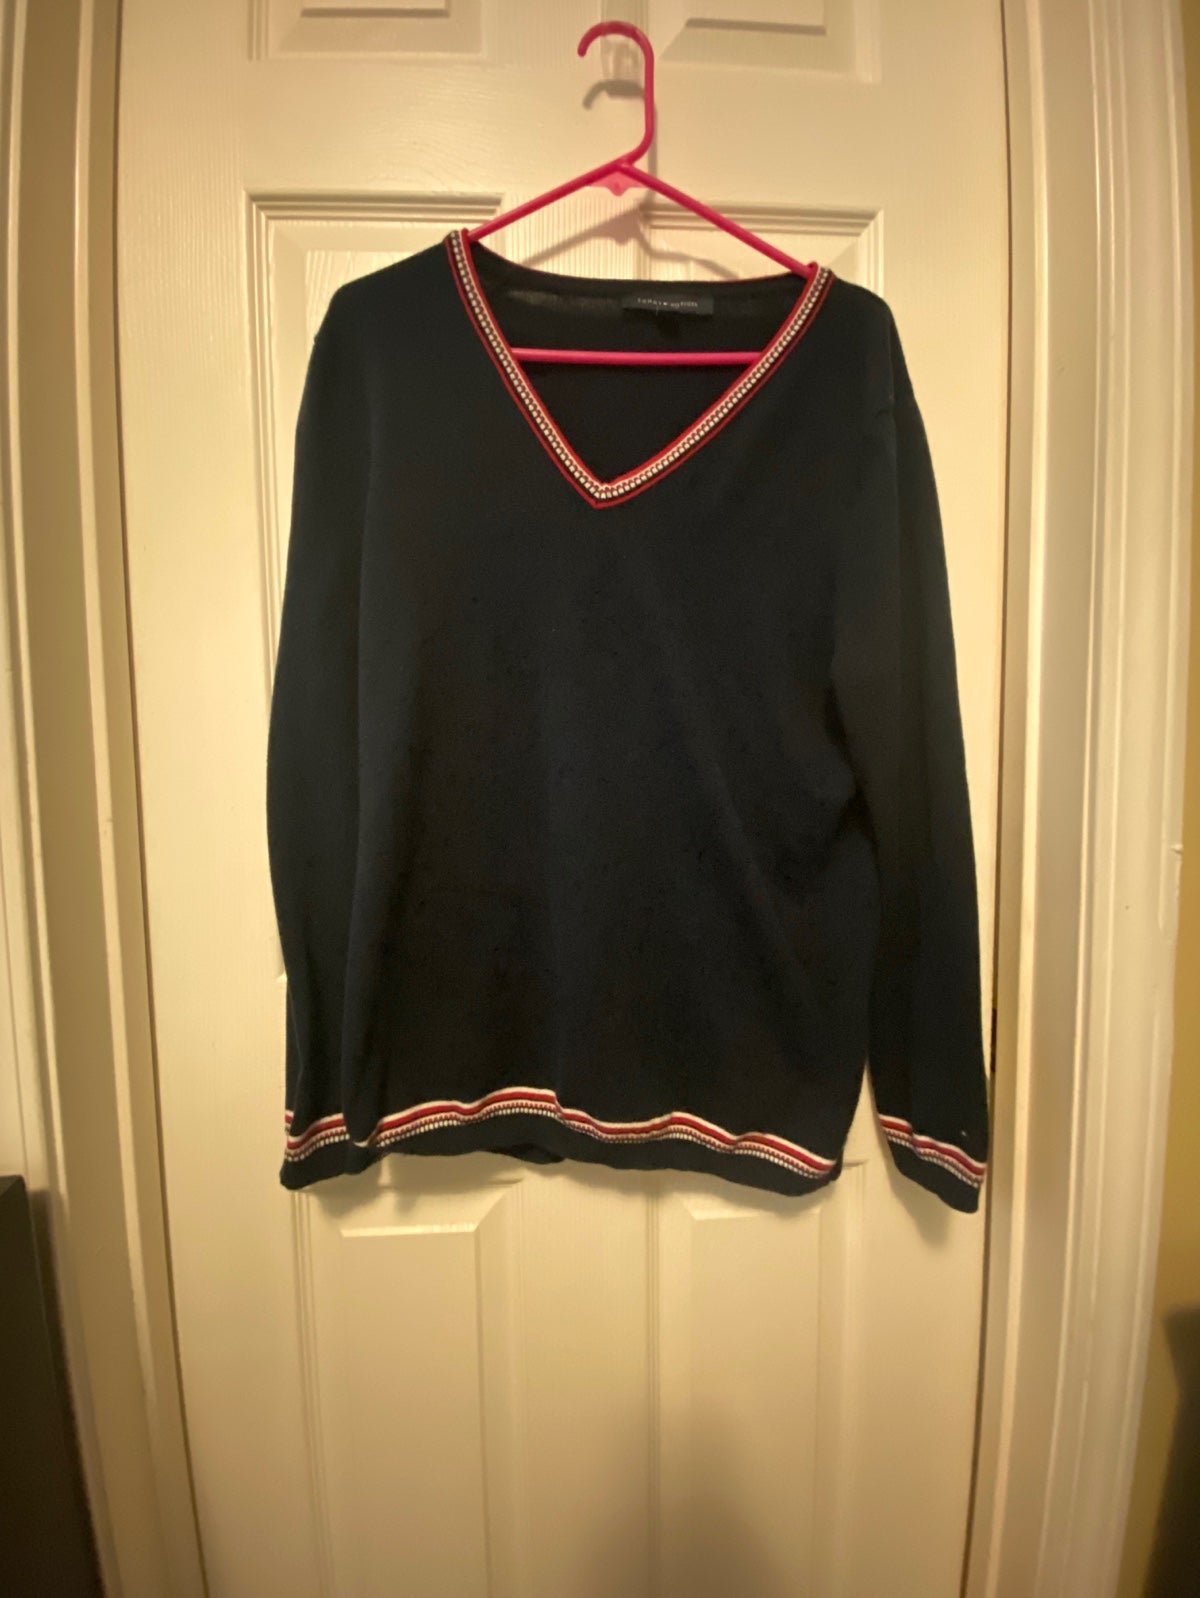 cheapest place to buy  Tommy Hilfiger sweater llORobapo